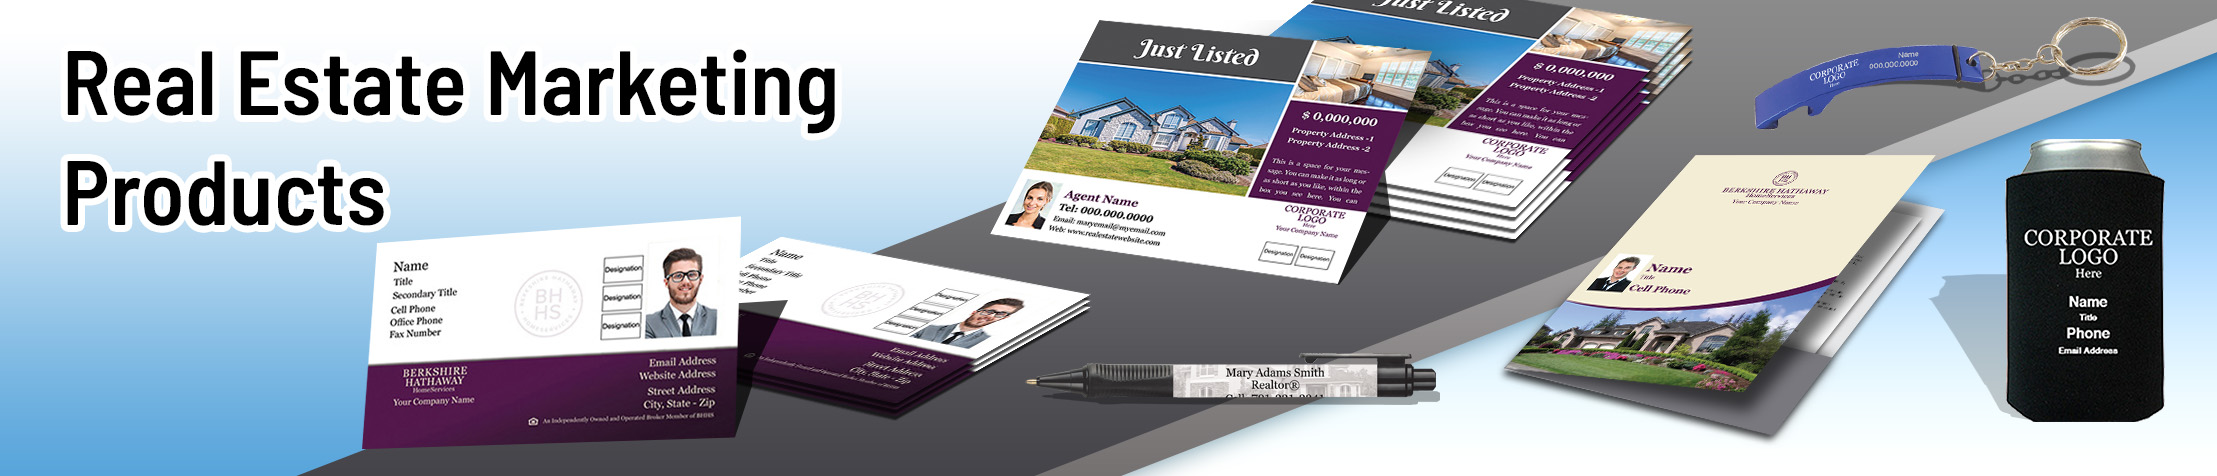 Berkshire Hathaway Real Estate   Marketing Products | Sparkprint.com